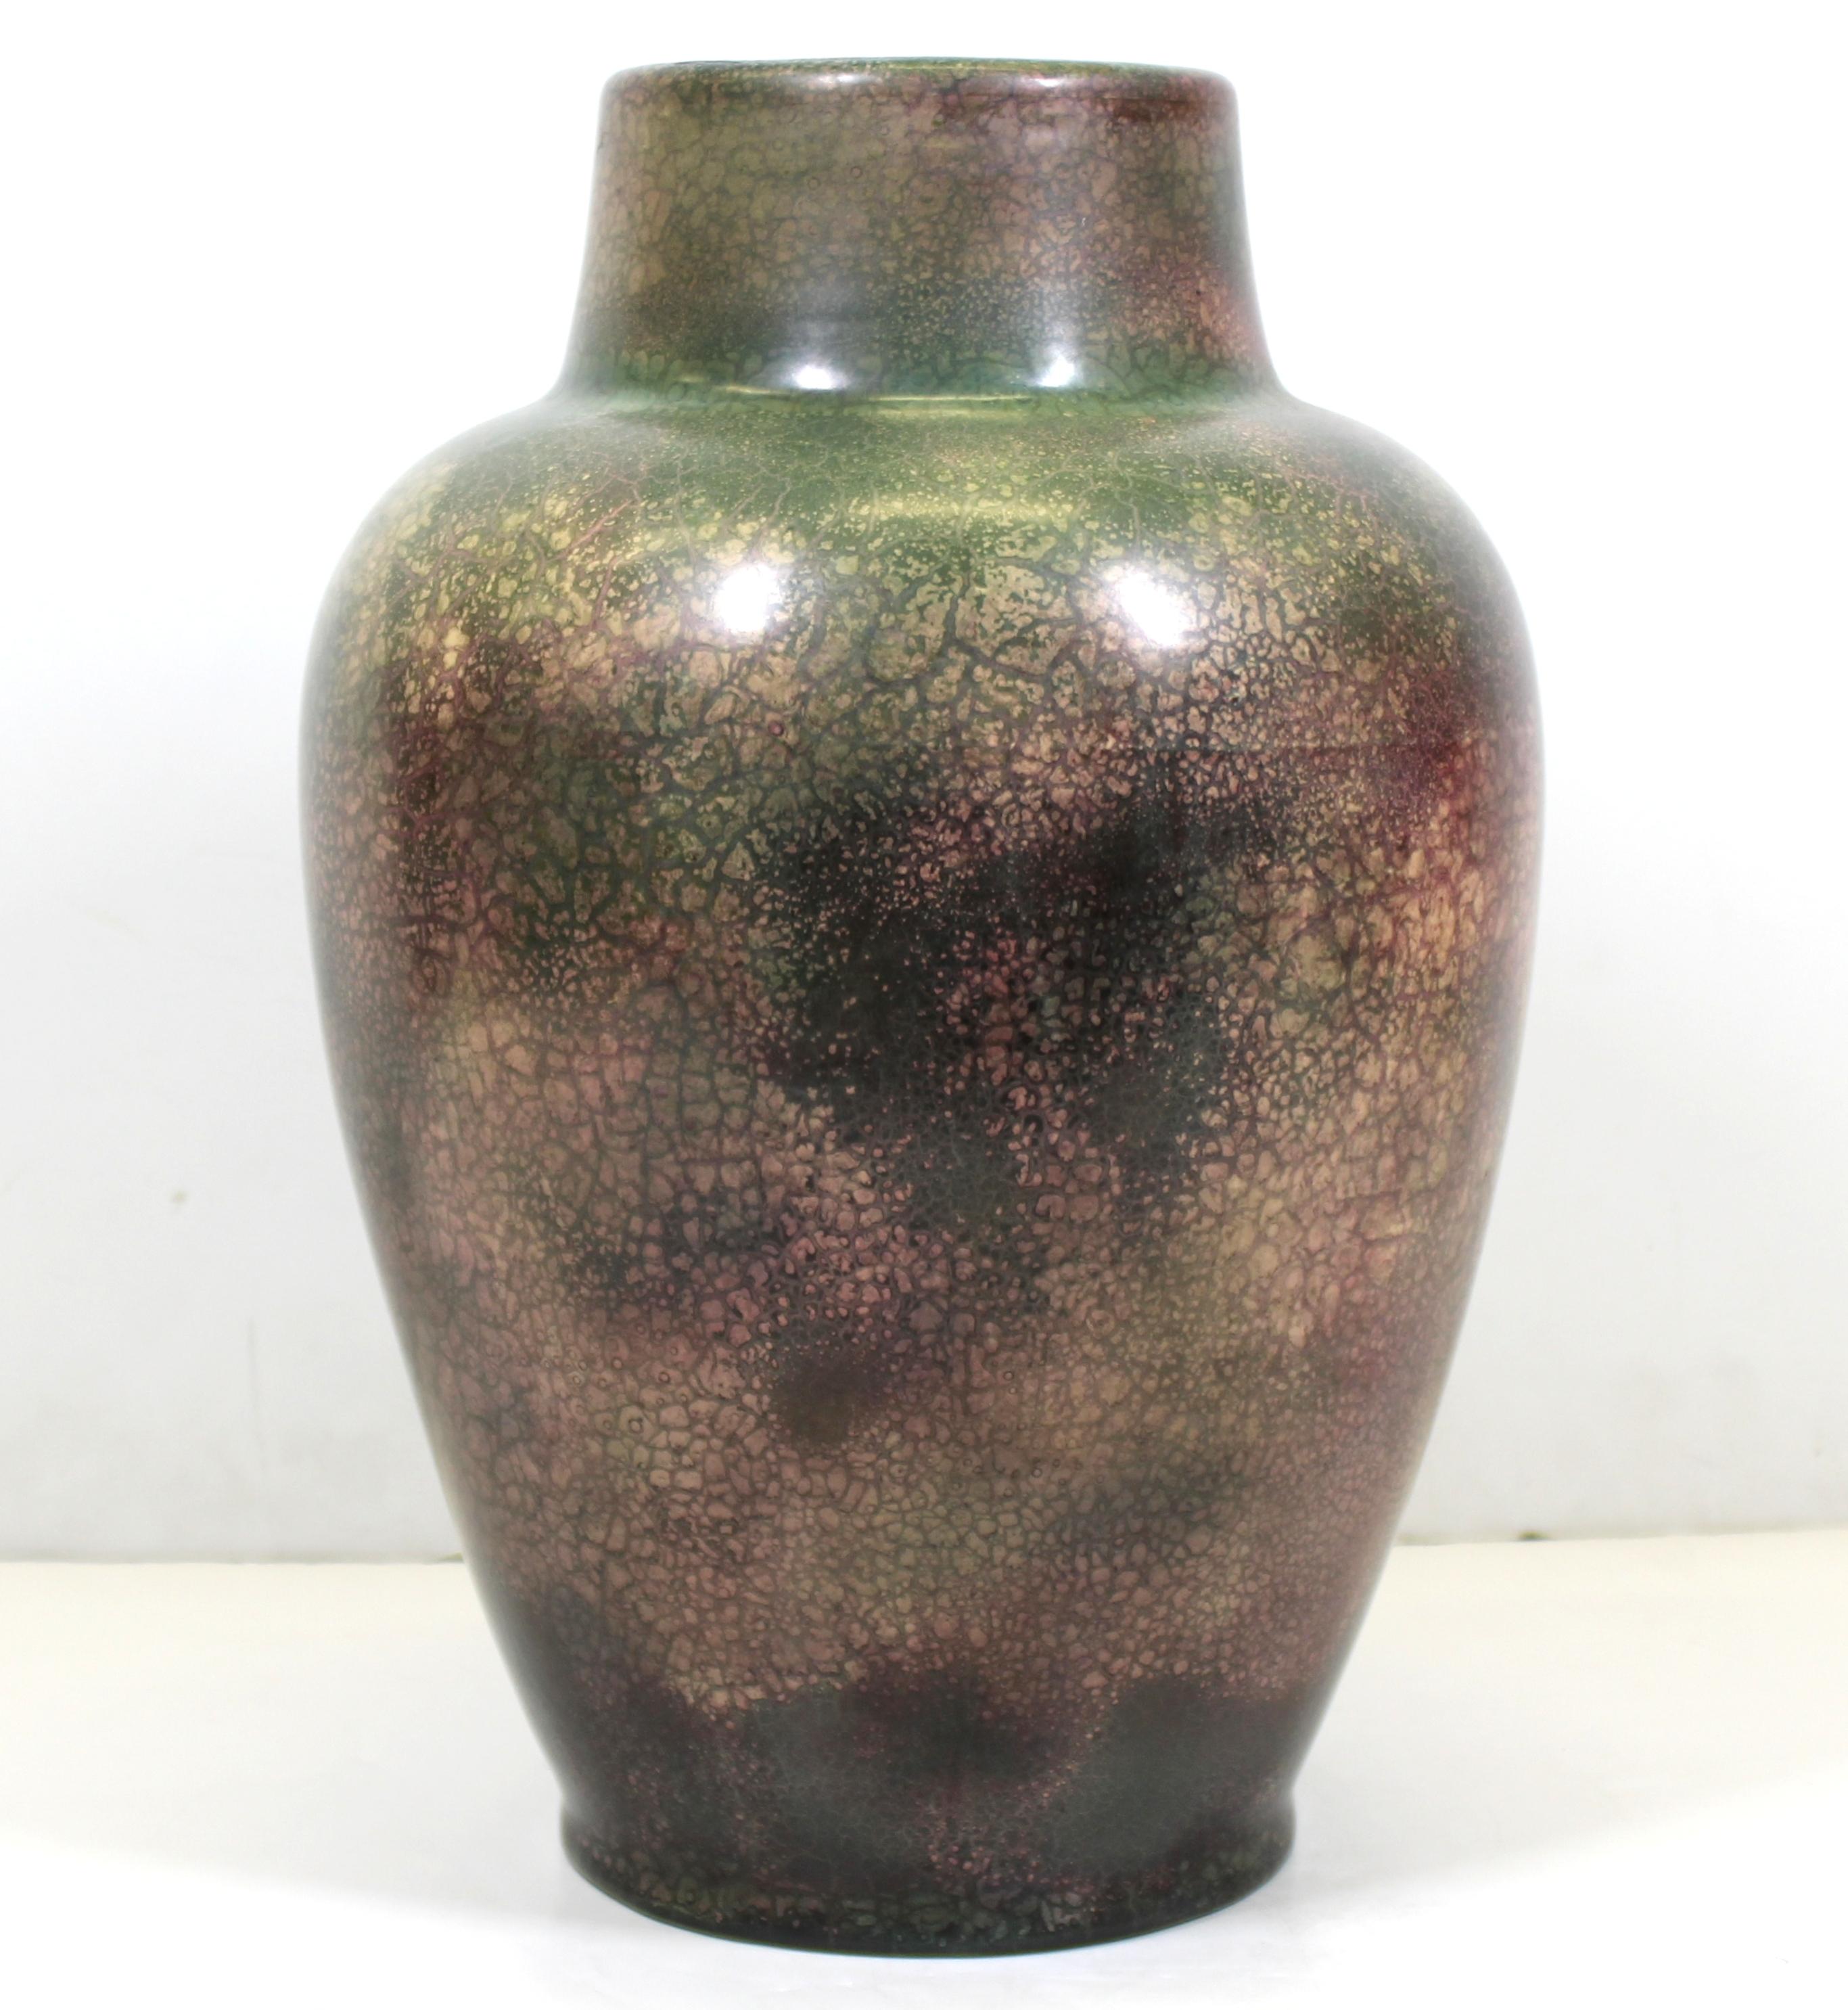 American Arts & Crafts Chinese form ceramic vase with craquelure technique, made by Roseville with the Pauleo pattern and retailed at Tiffany. This extremely rare piece of ceramic was made with numerous glazes, including lustres, matte mottled